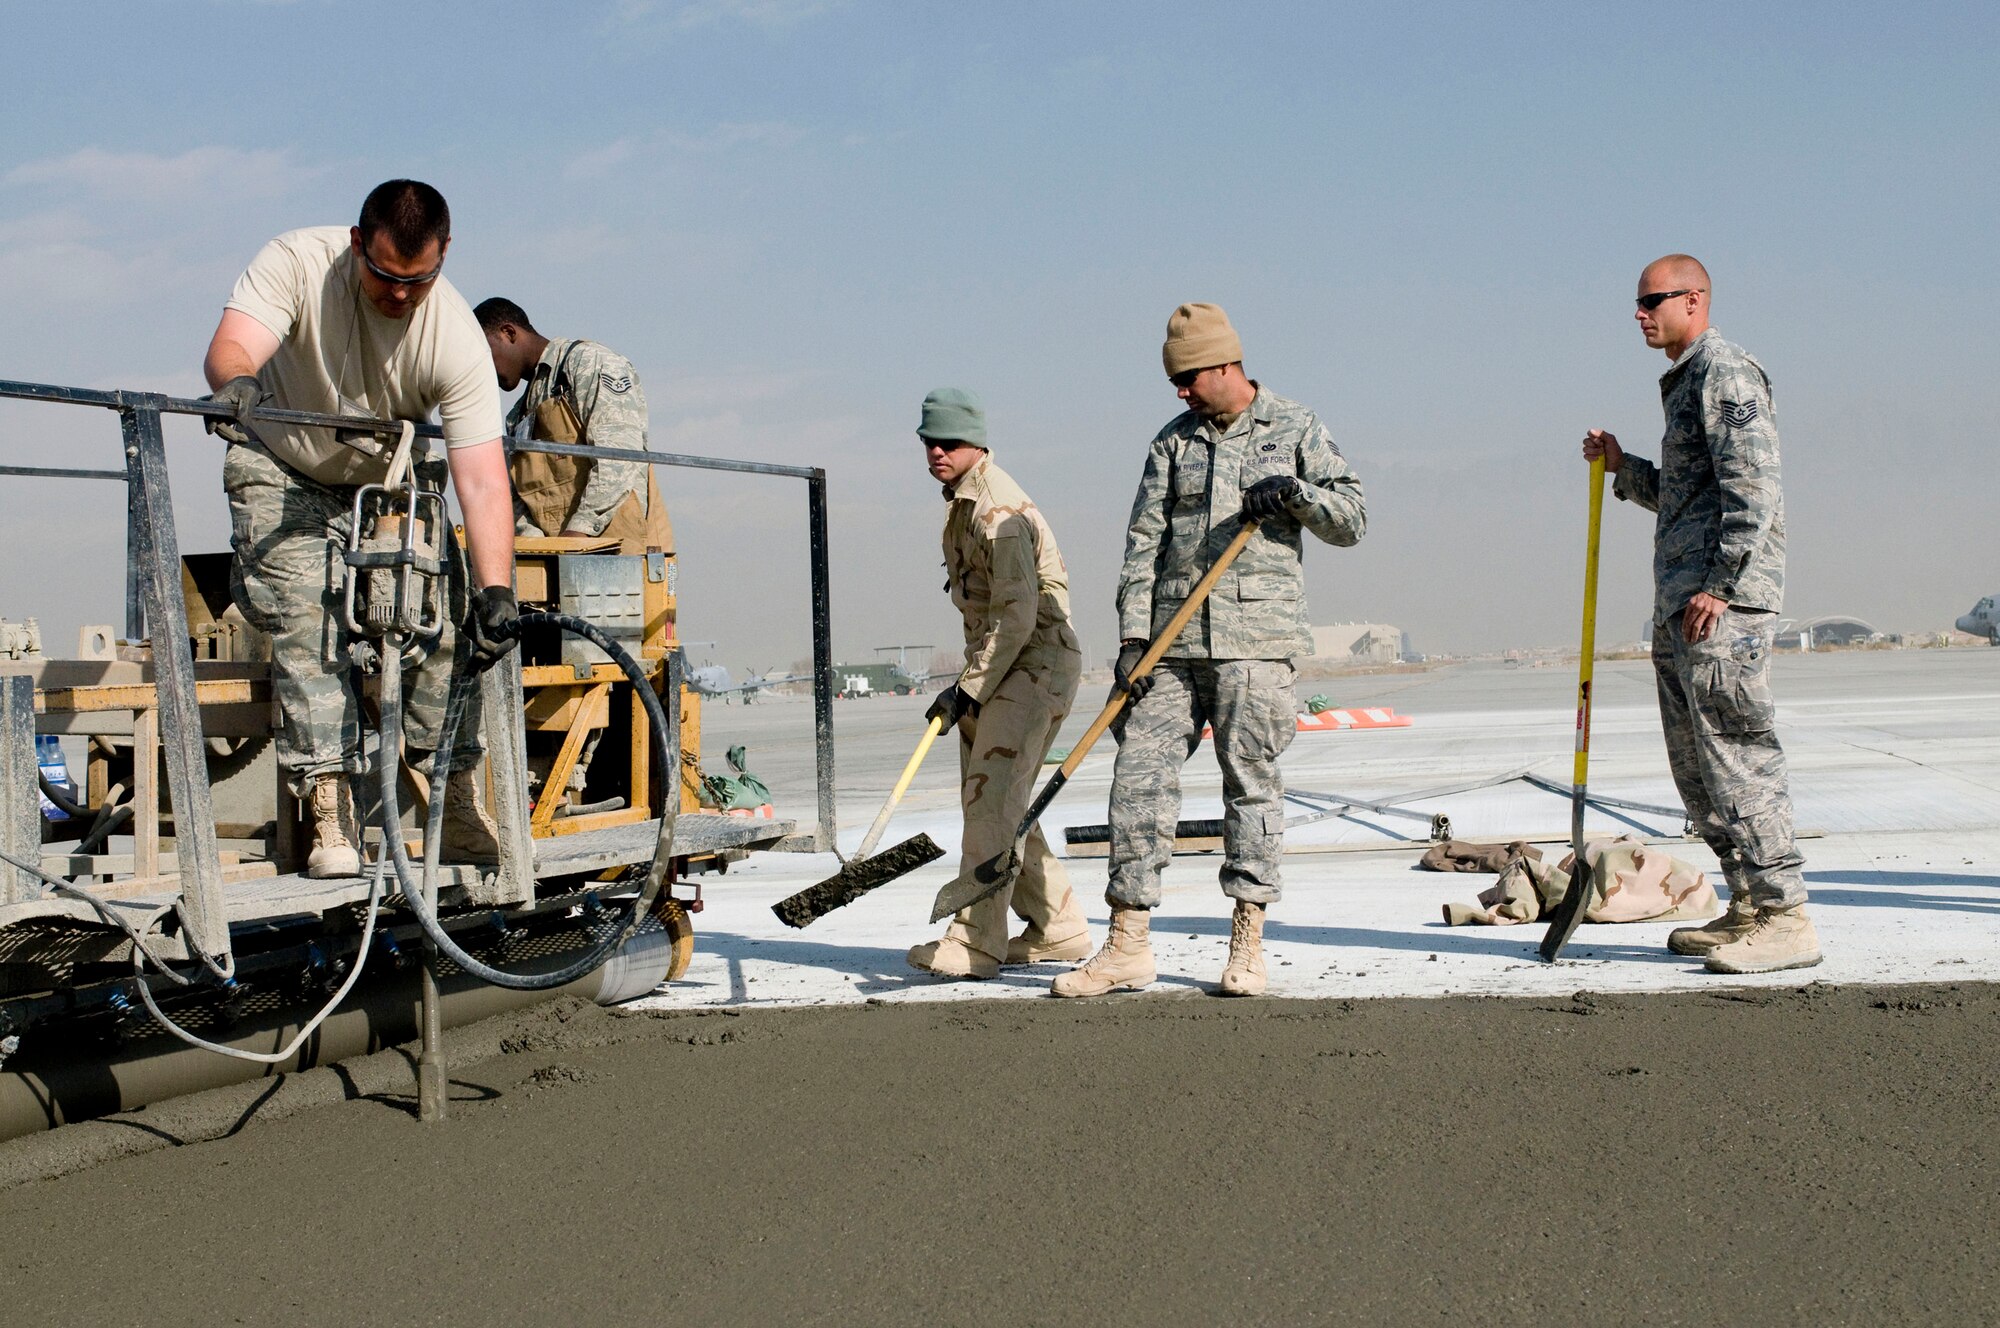 Airmen of the 455th Expeditionary Civil Engineer Squadron lay concrete on Thanksgiving Day, Nov. 27., at Bagram Air Field, Afghanistan. Taking advantage of every day possible to lay concrete, the Airmen work hard to expand the flightline before cold weather makes laying the temperamental concrete impossible. (U.S. Air Force photo by Staff Sgt. Samuel Morse)(Released)